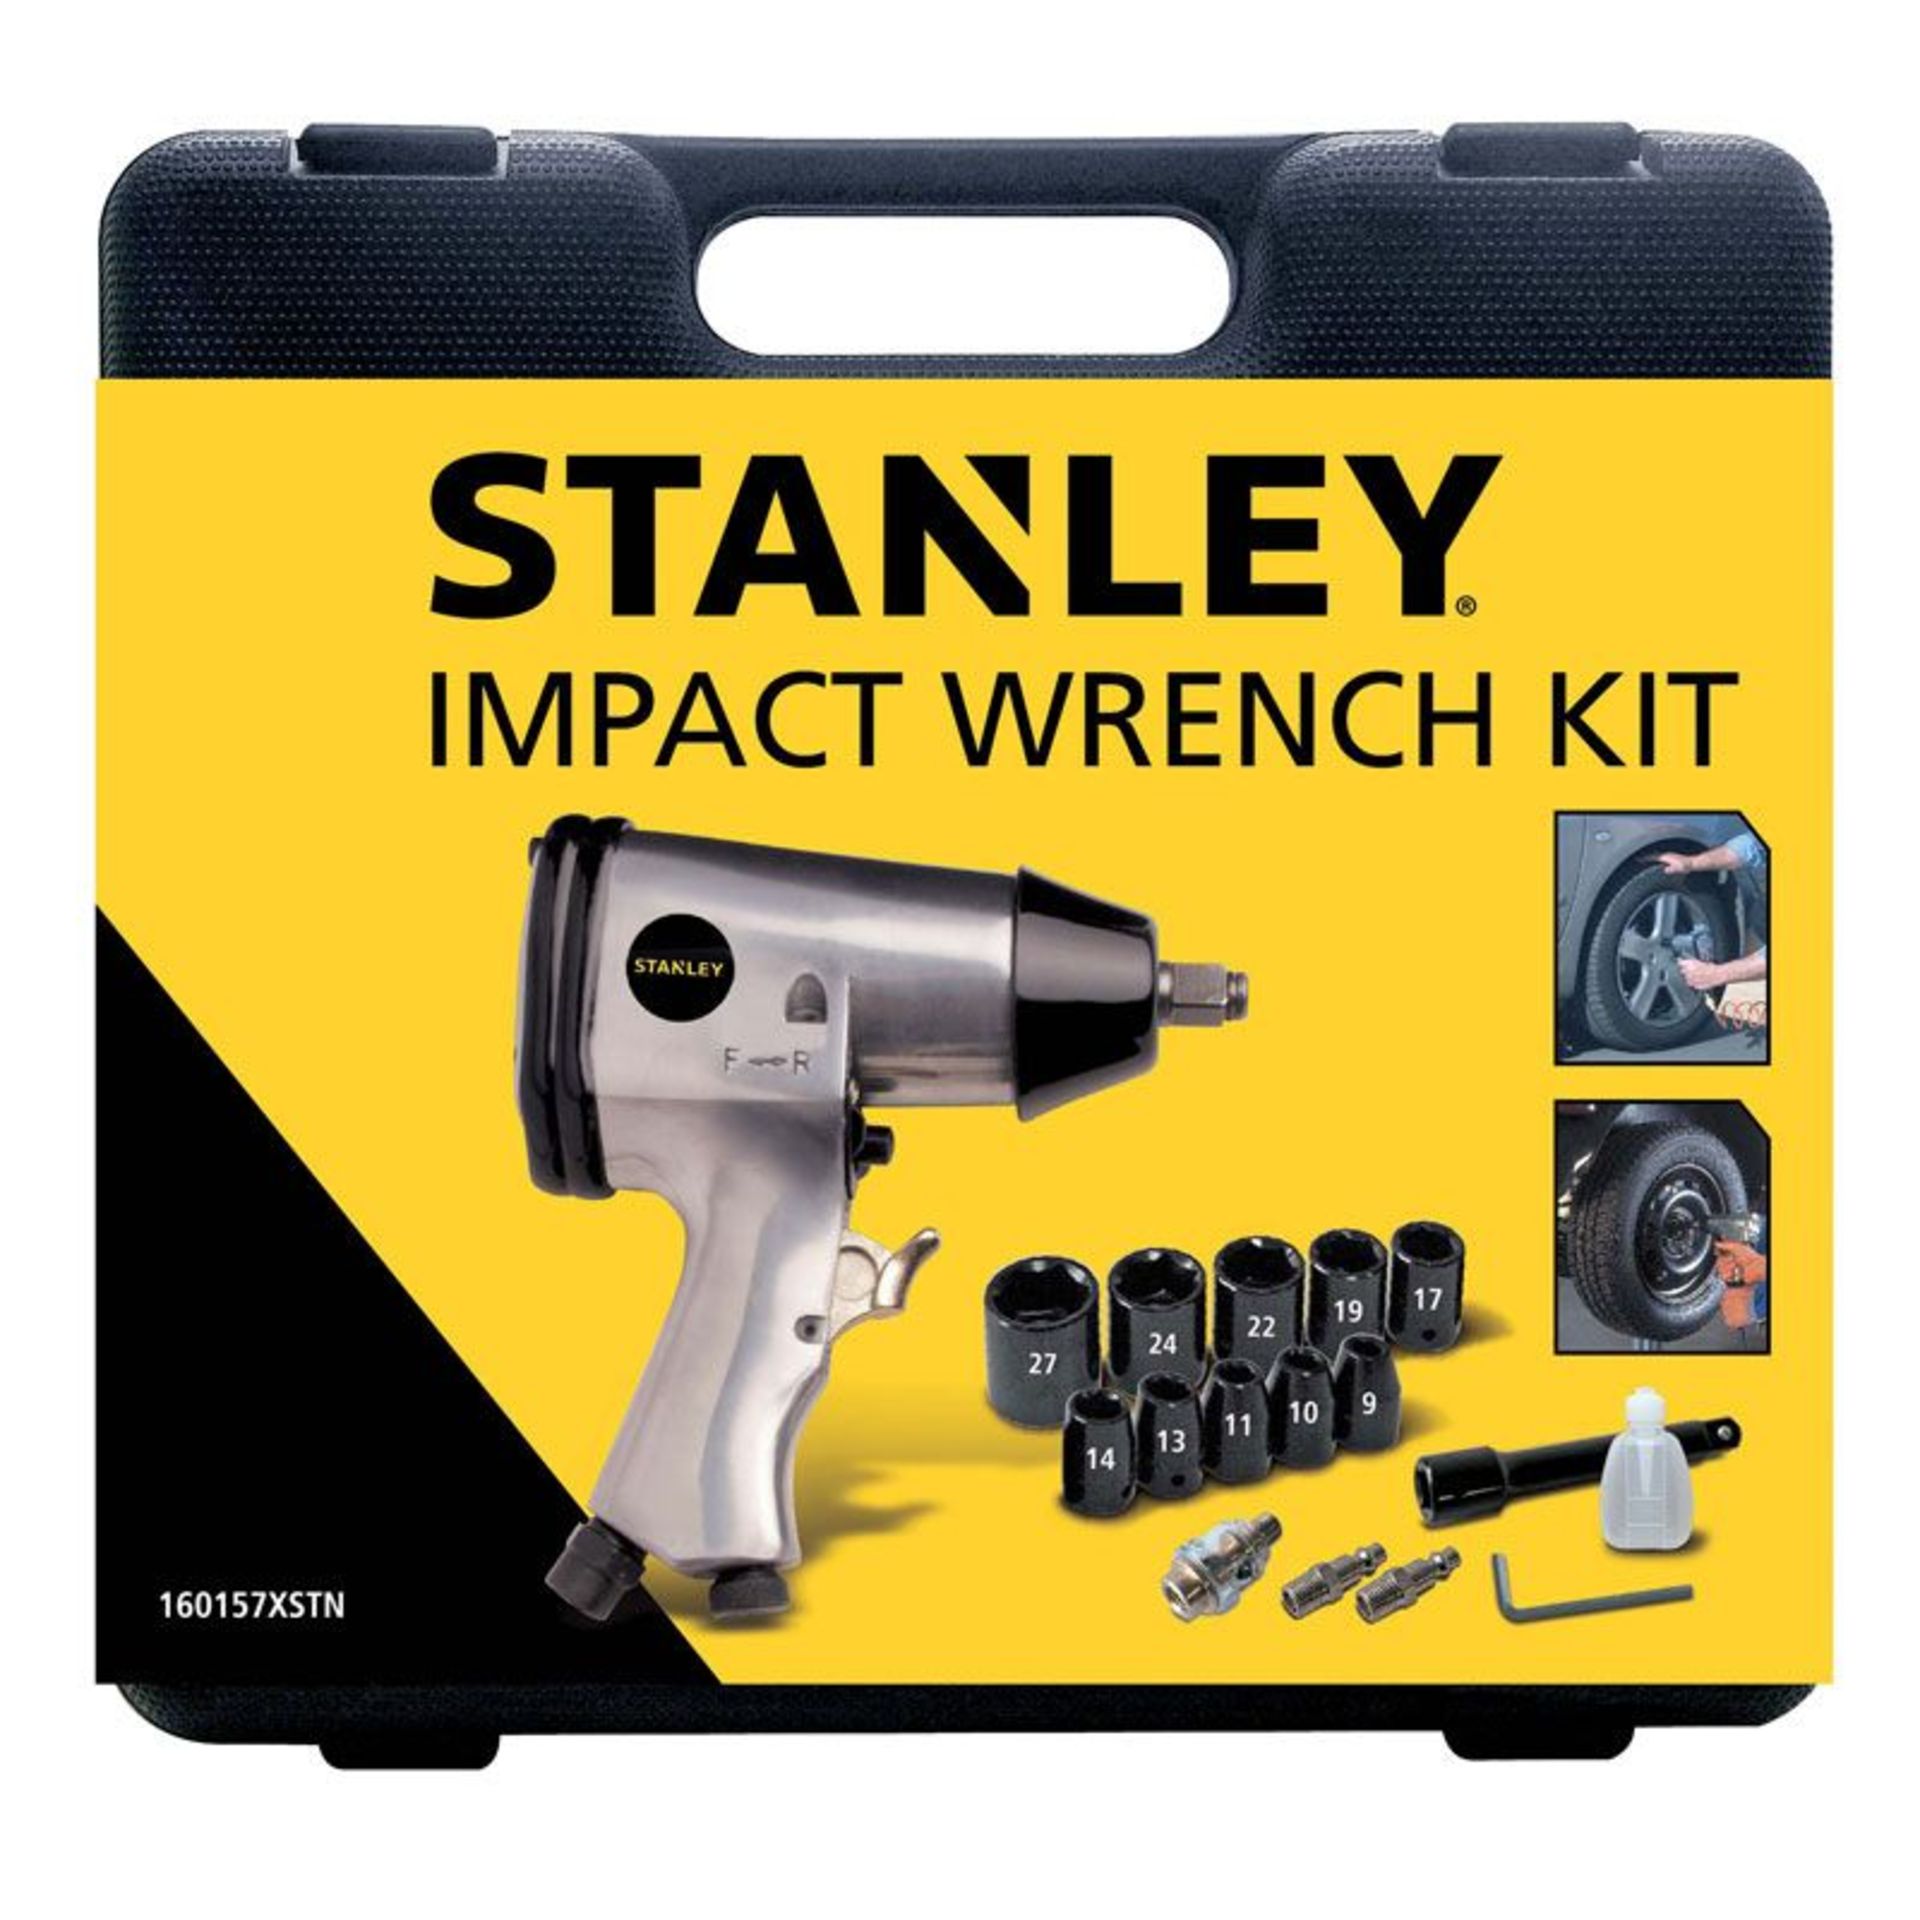 5 X Brand New Stanley Pneumatic Gun with Air Compressor kit, Pressure used 6 bar Air consumed 200